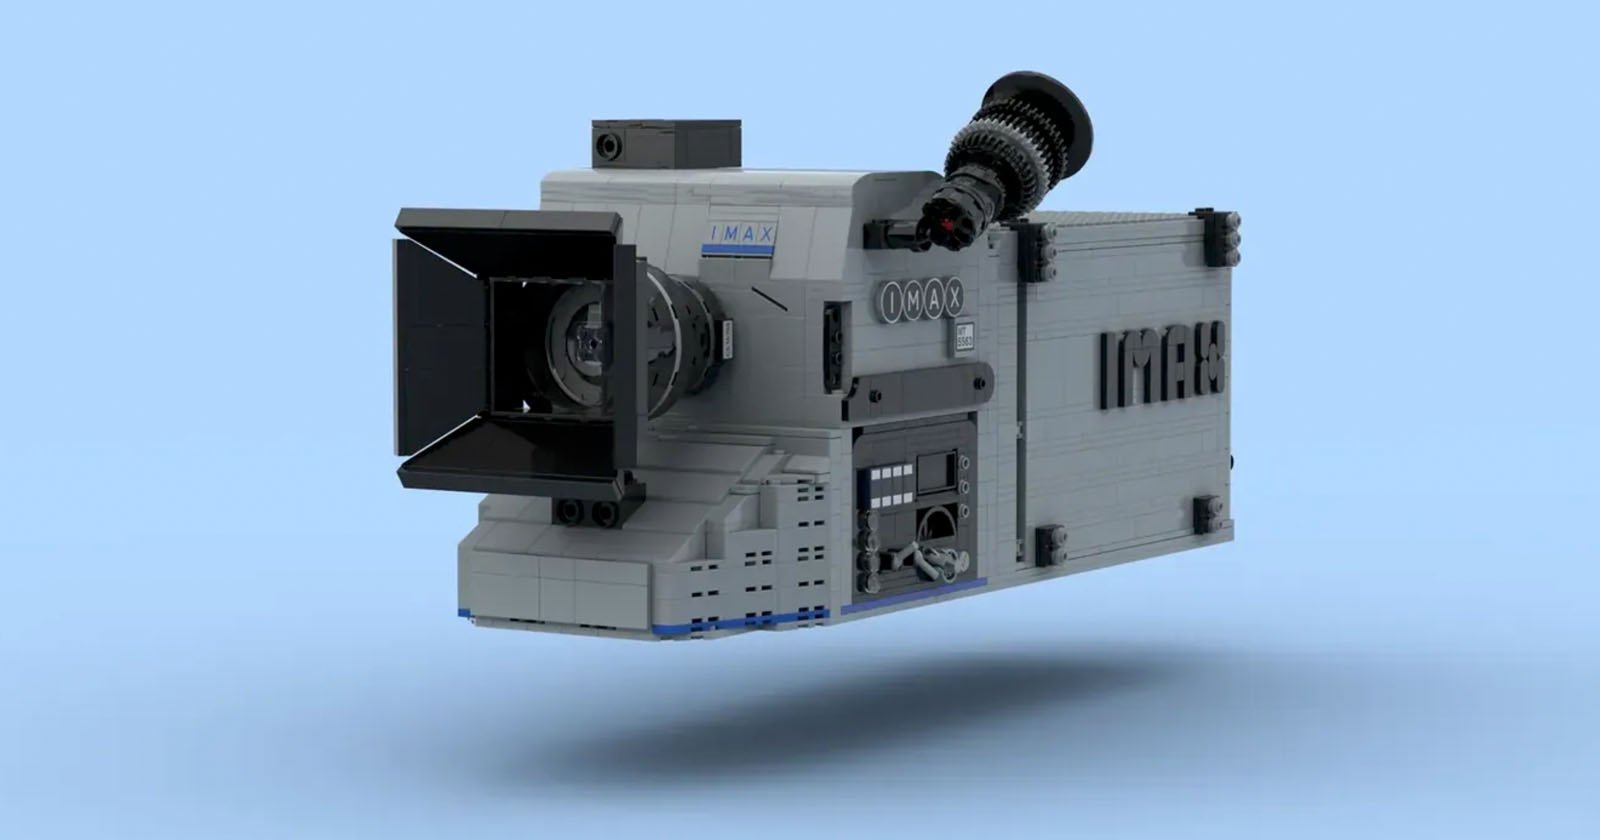 Live Out Your Imaginary Directorial Dreams With a LEGO IMAX Camera